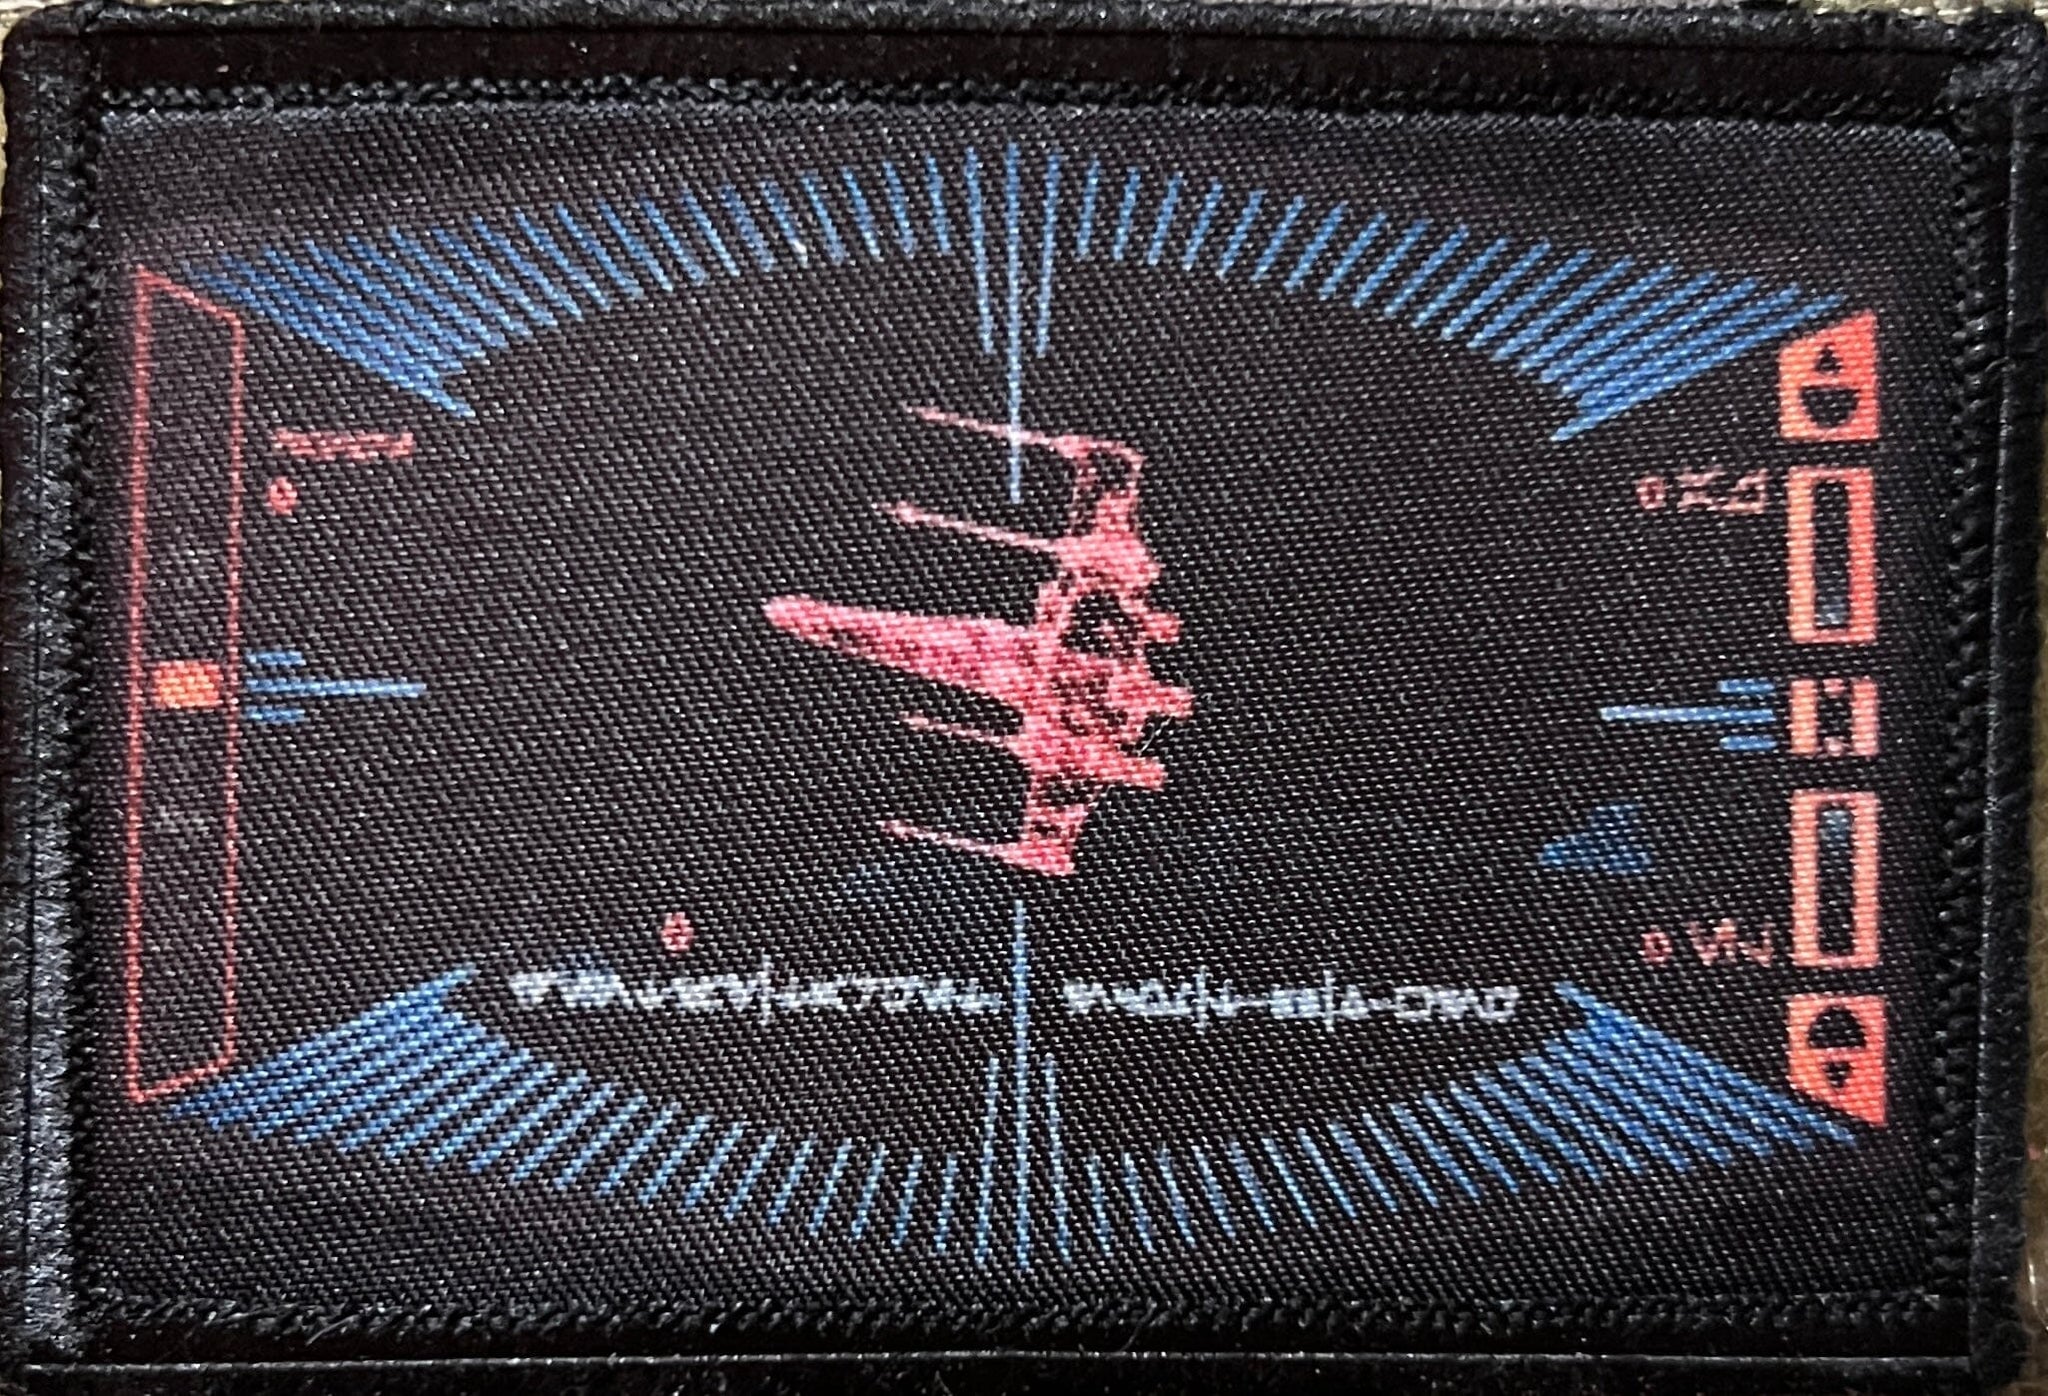 Star Wars Millennium Falcon Targeting Computer Morale Patch